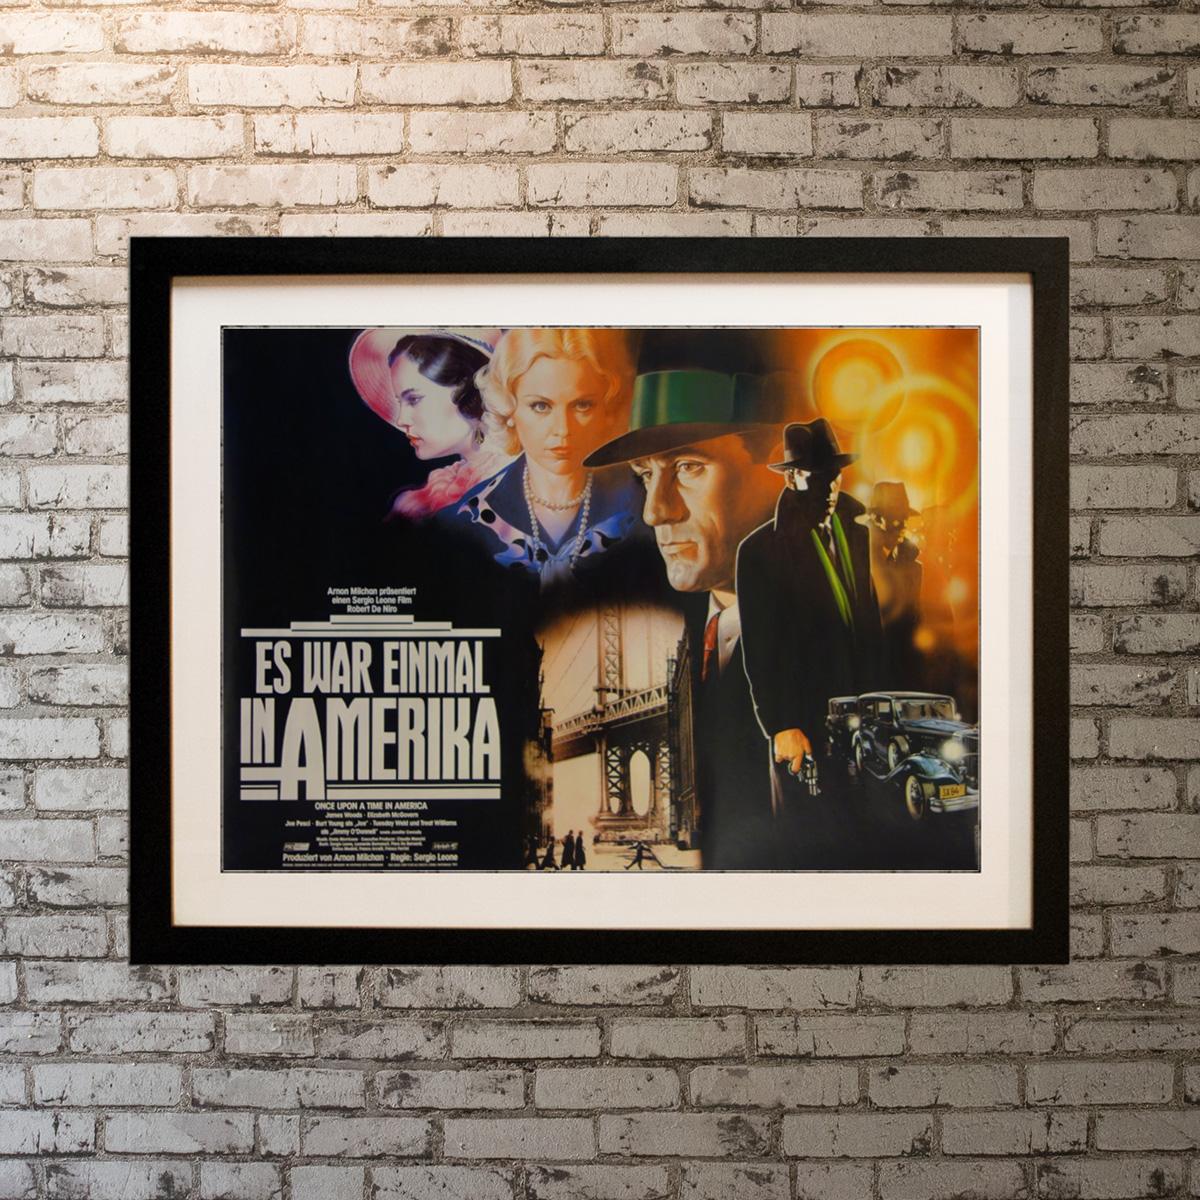 Noodles, a former gangster during the Prohibition Era, returns to New York after a self-imposed exile to confront his past and make amends for his mistakes.

Linen-backing: £100

Framing options:
Glass and single mount £185
Glass and double